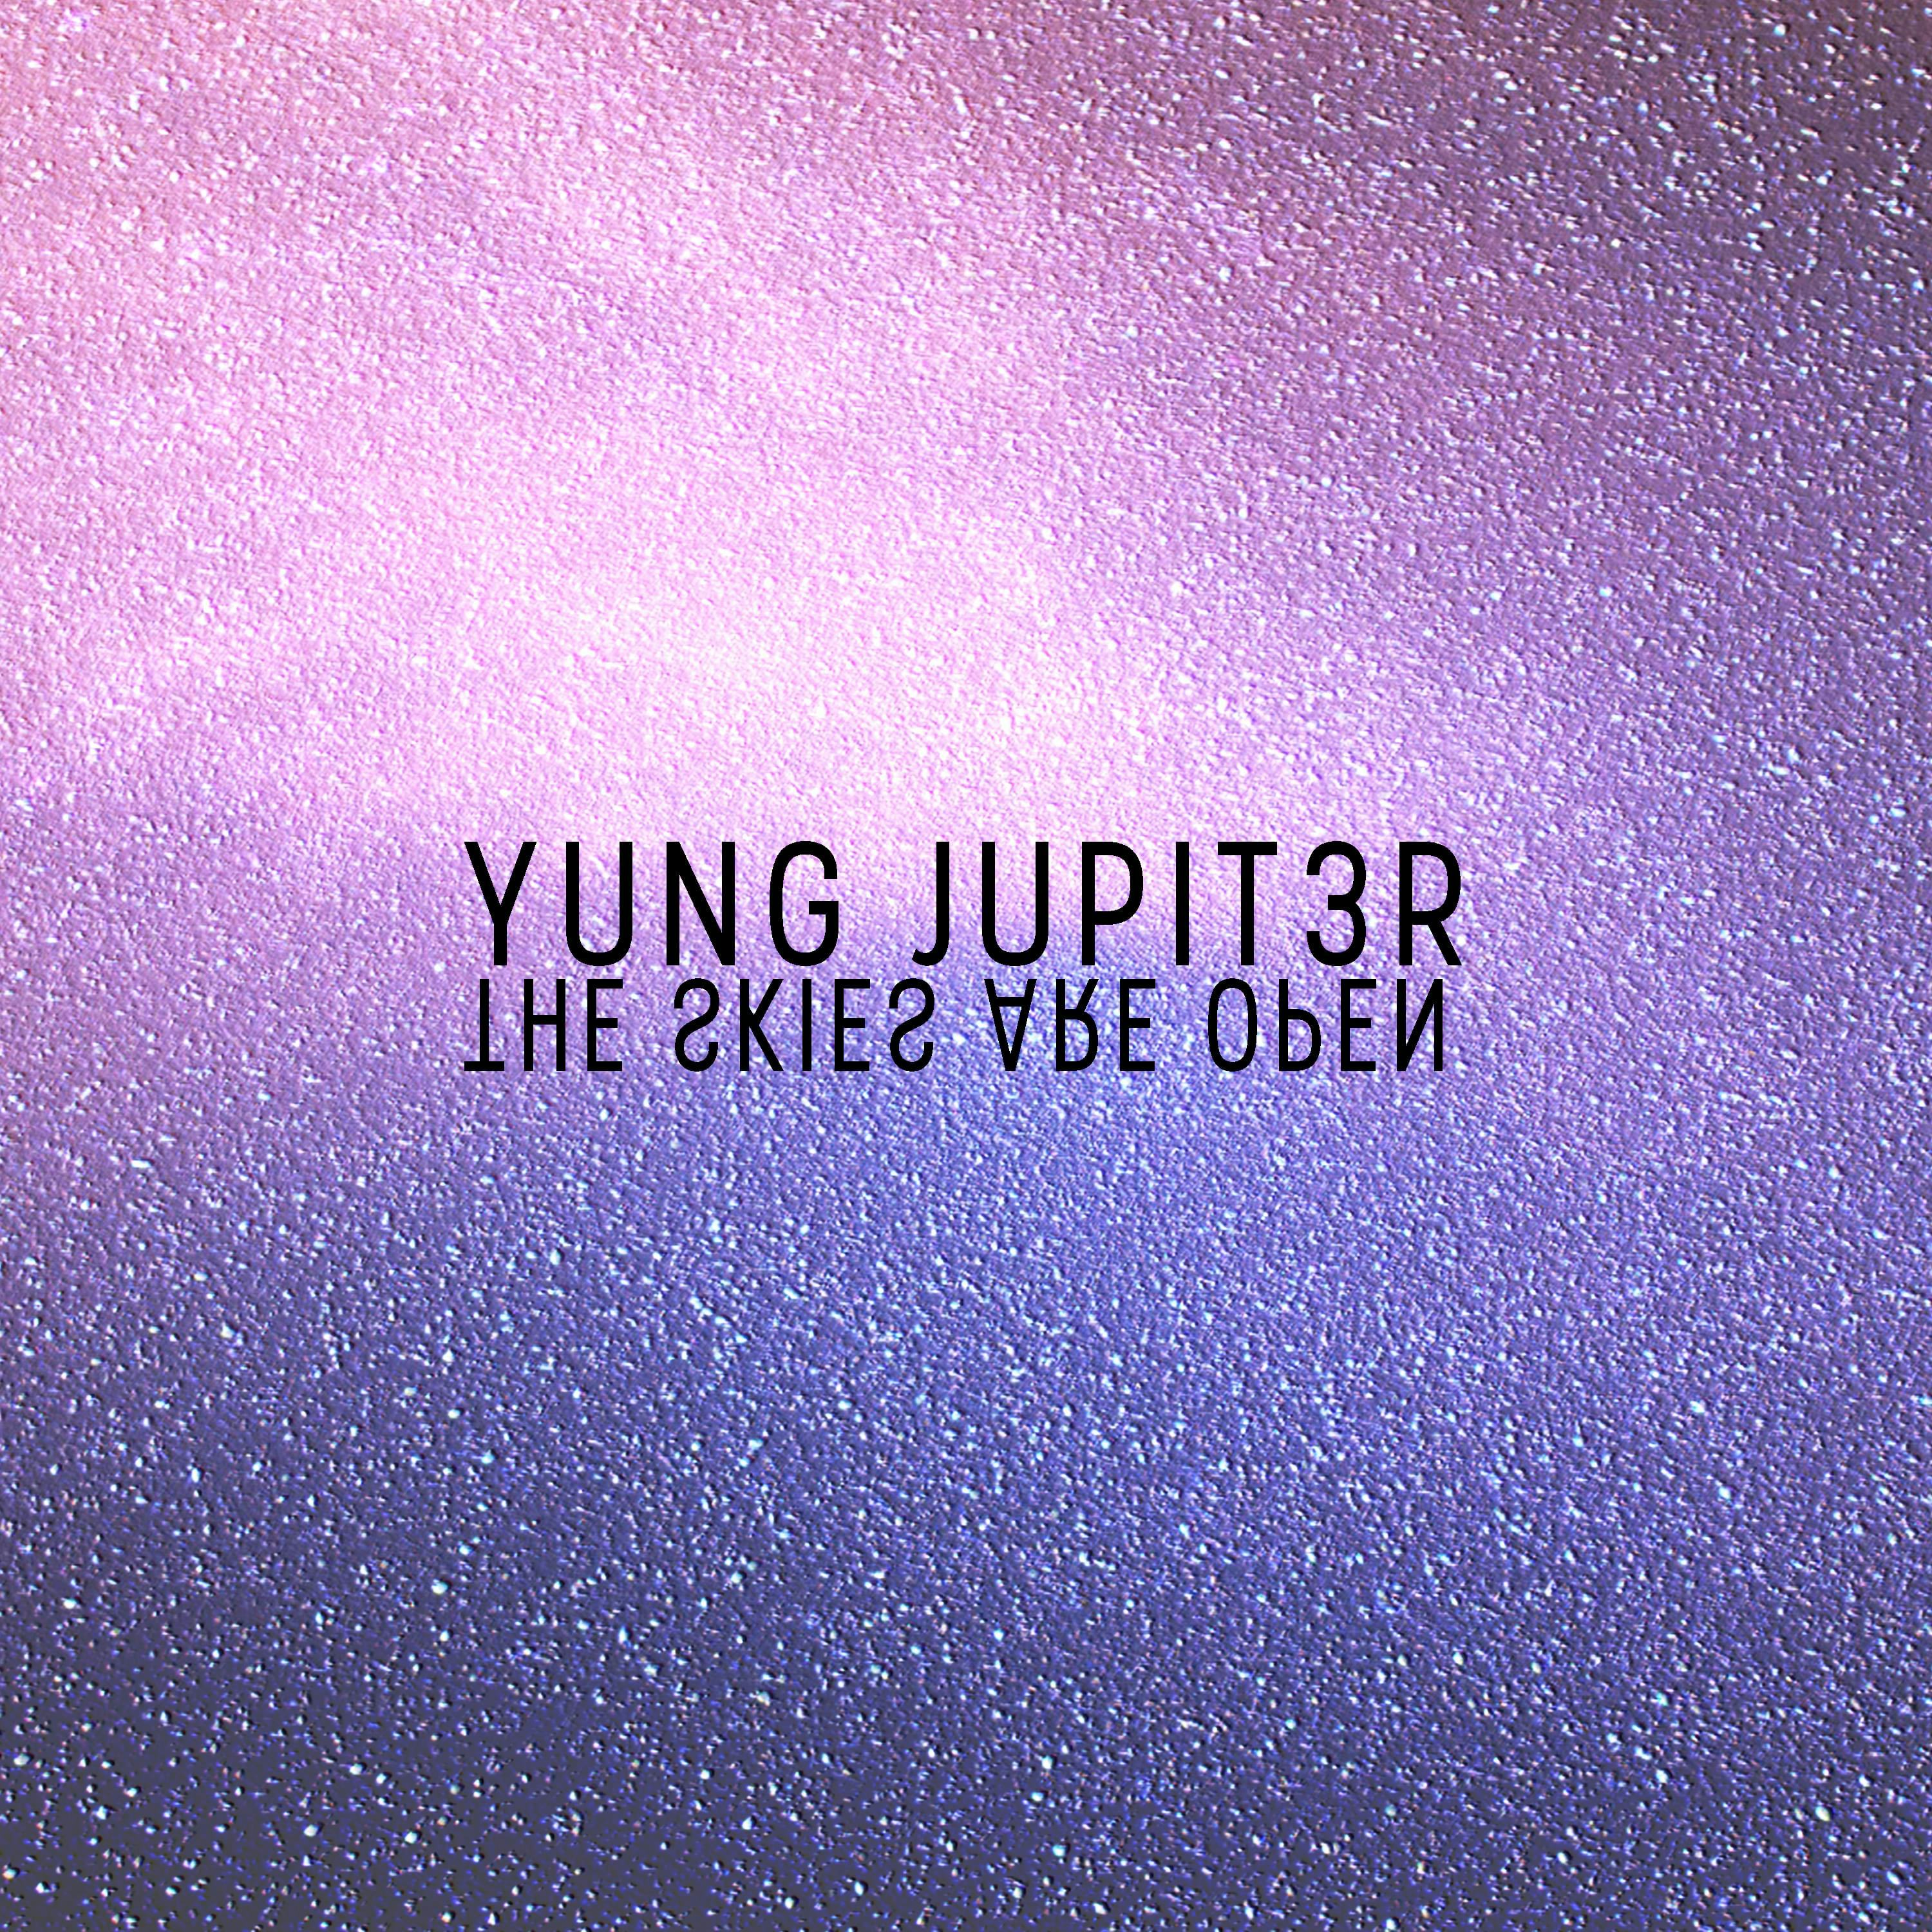 Cover art for Yung Jupit3r - Skies Are Open by starkey